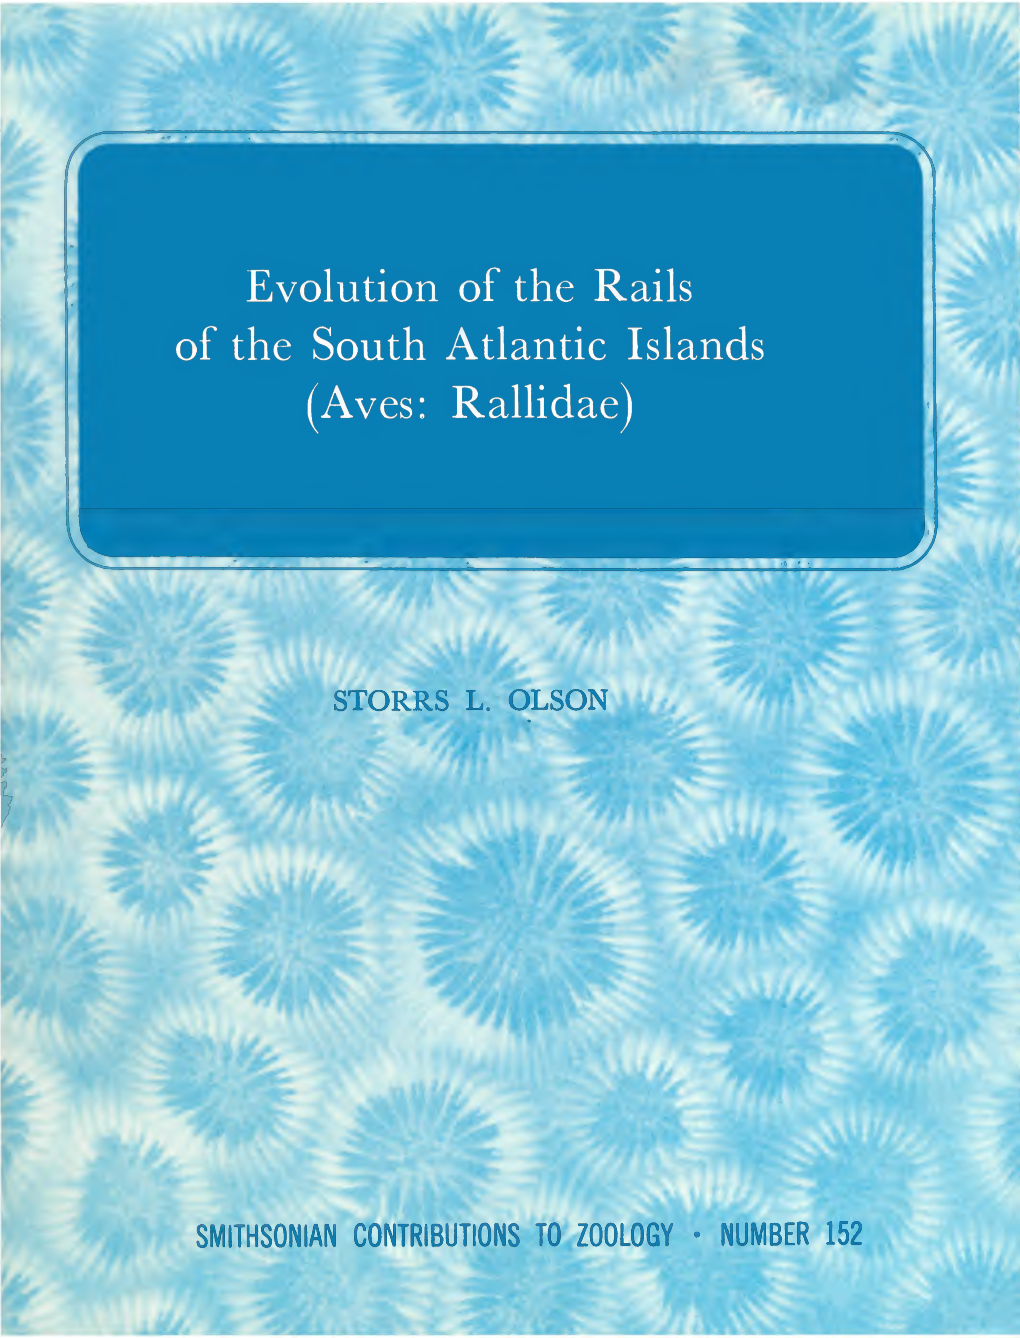 Evolution of the Rails of the South Atlantic Islands (Aves: Rallidae)